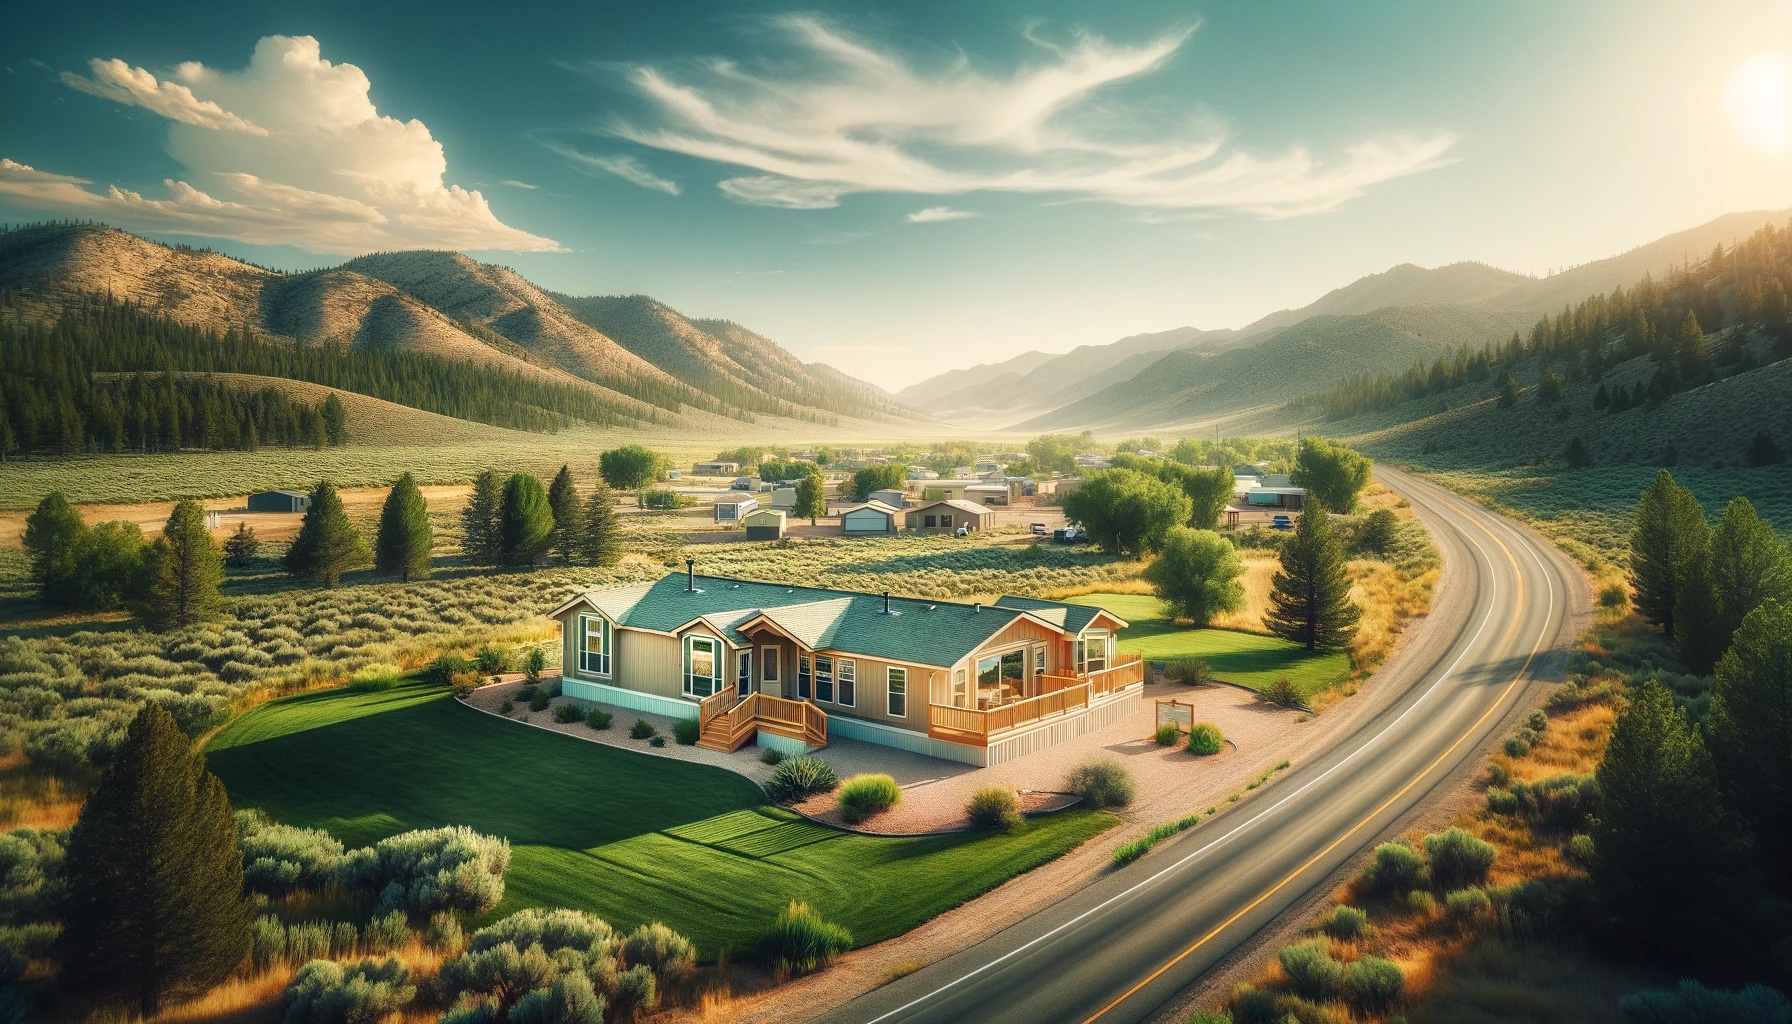 Why Manufactured Housing is the Smart Choice in Rural Nevada